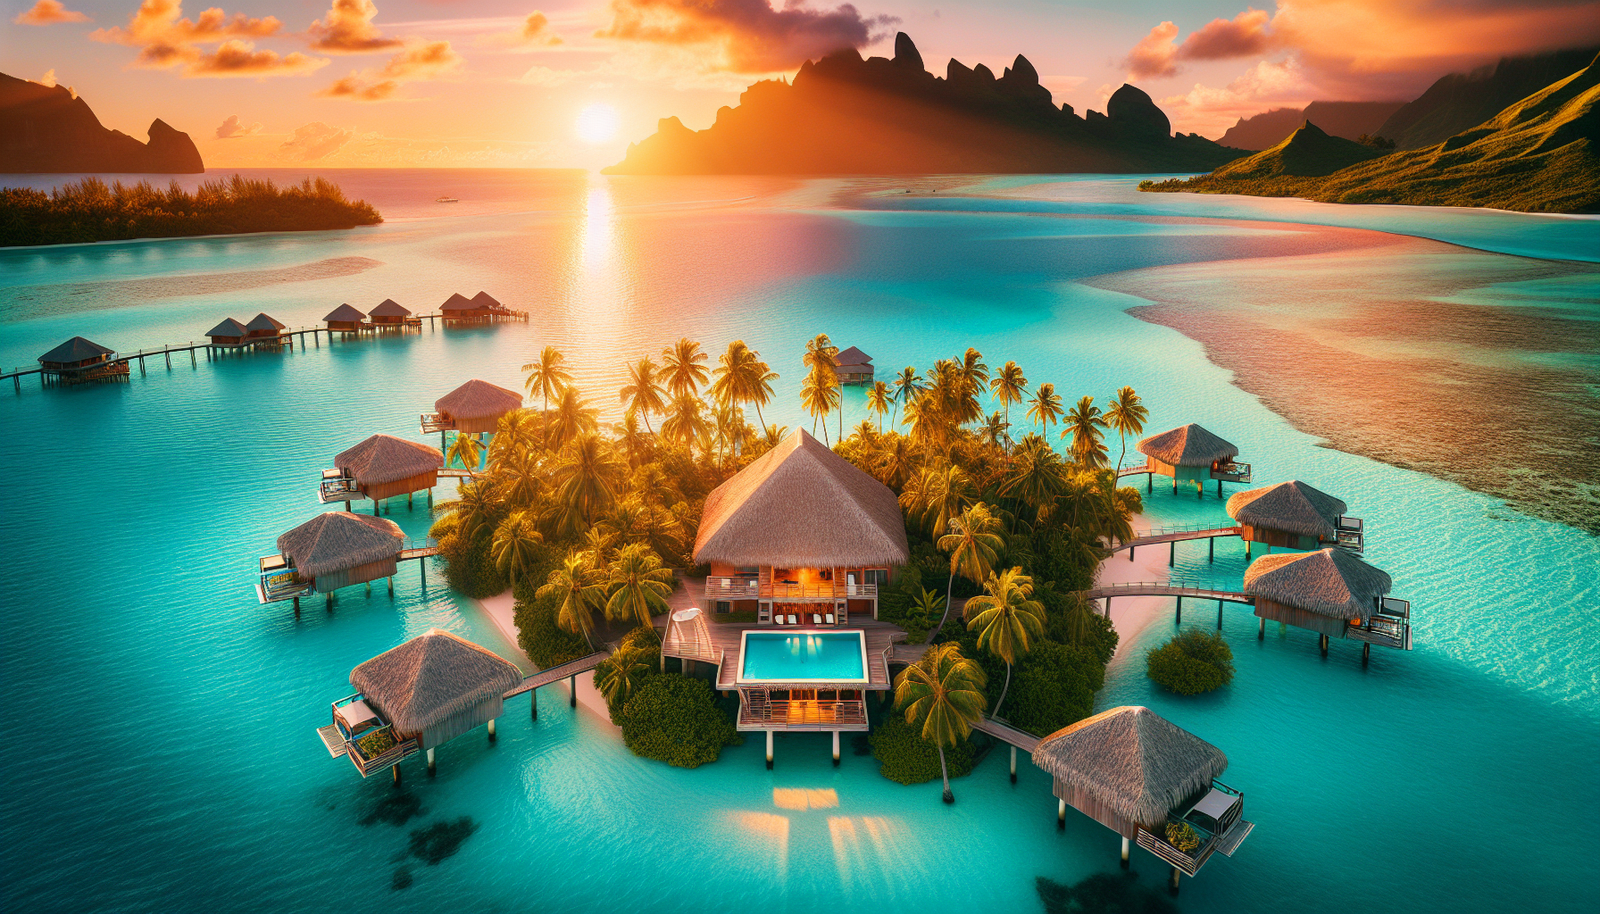 How To Find The Perfect Accommodation For A Wedding In Bora Bora